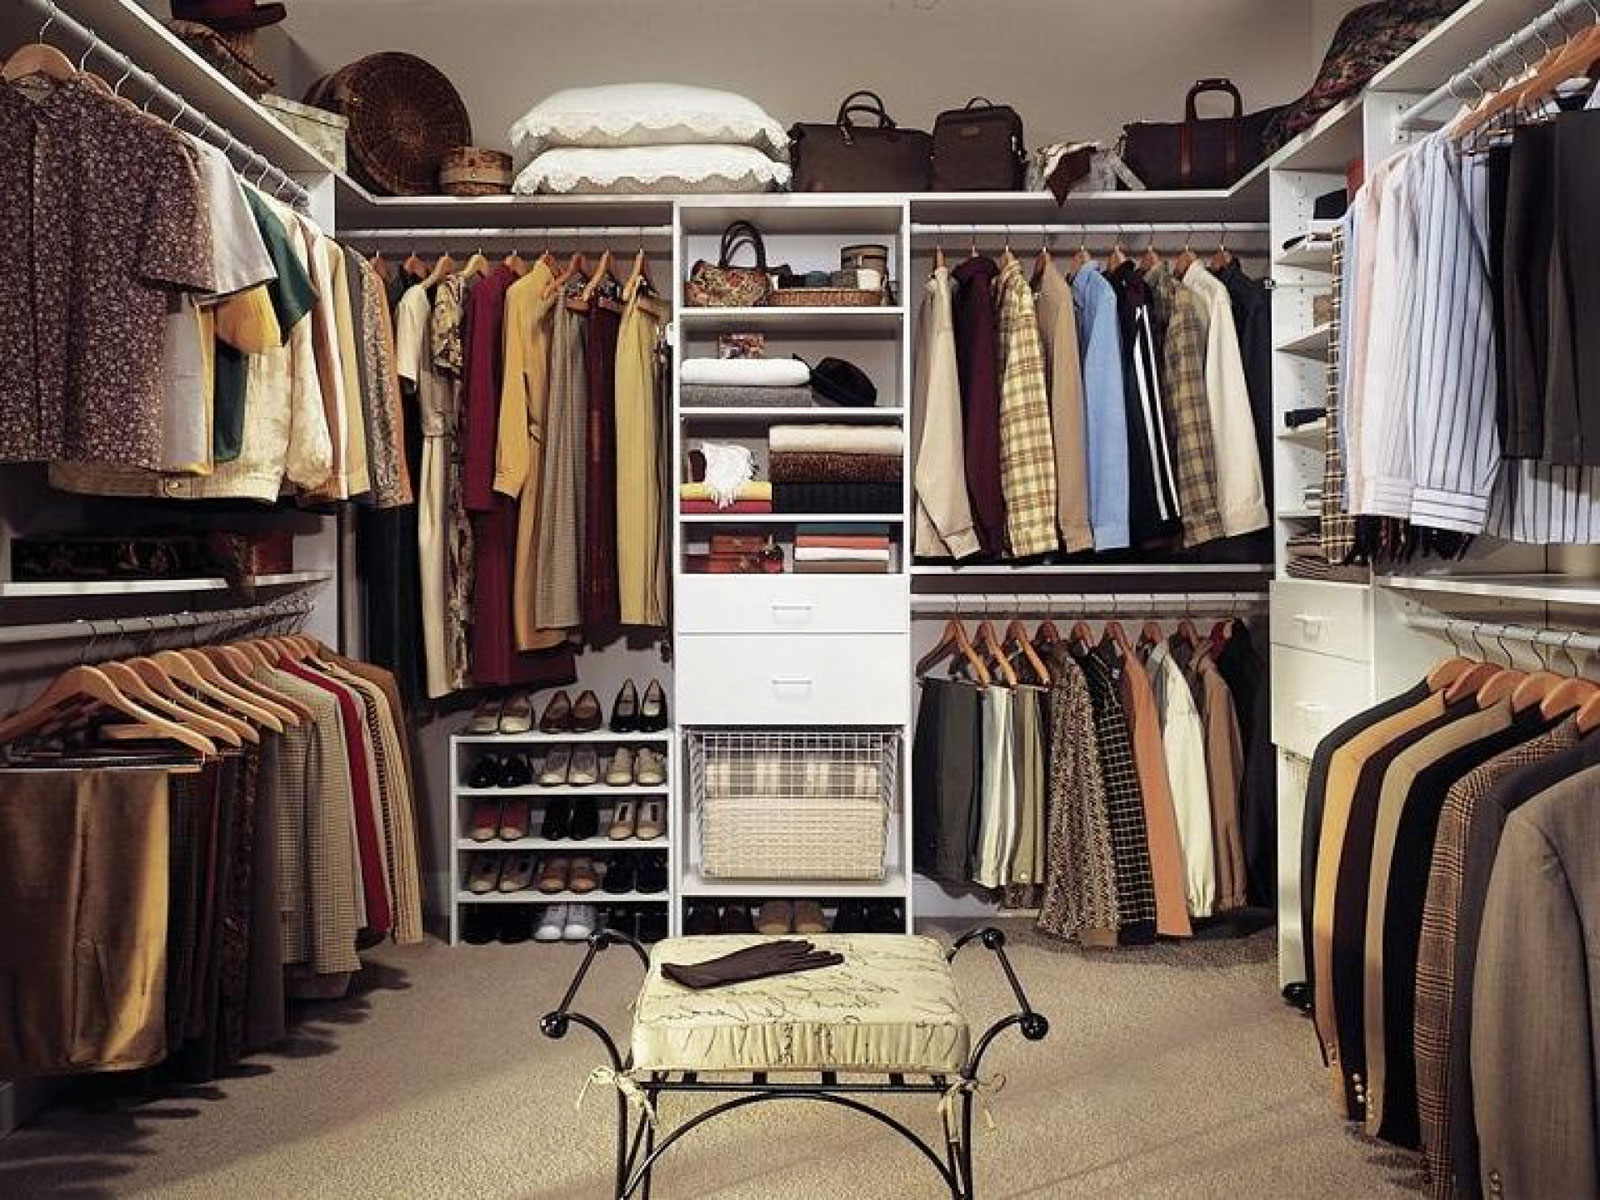 Contemporary Walk Ideas Charming Contemporary Walk In Closet Ideas Completed By Shoes And Bags Cabinet Plus Clothes Rack And Furnished With Simple Bench Closet Walk In Closet Ideas: Enjoying Private Collection